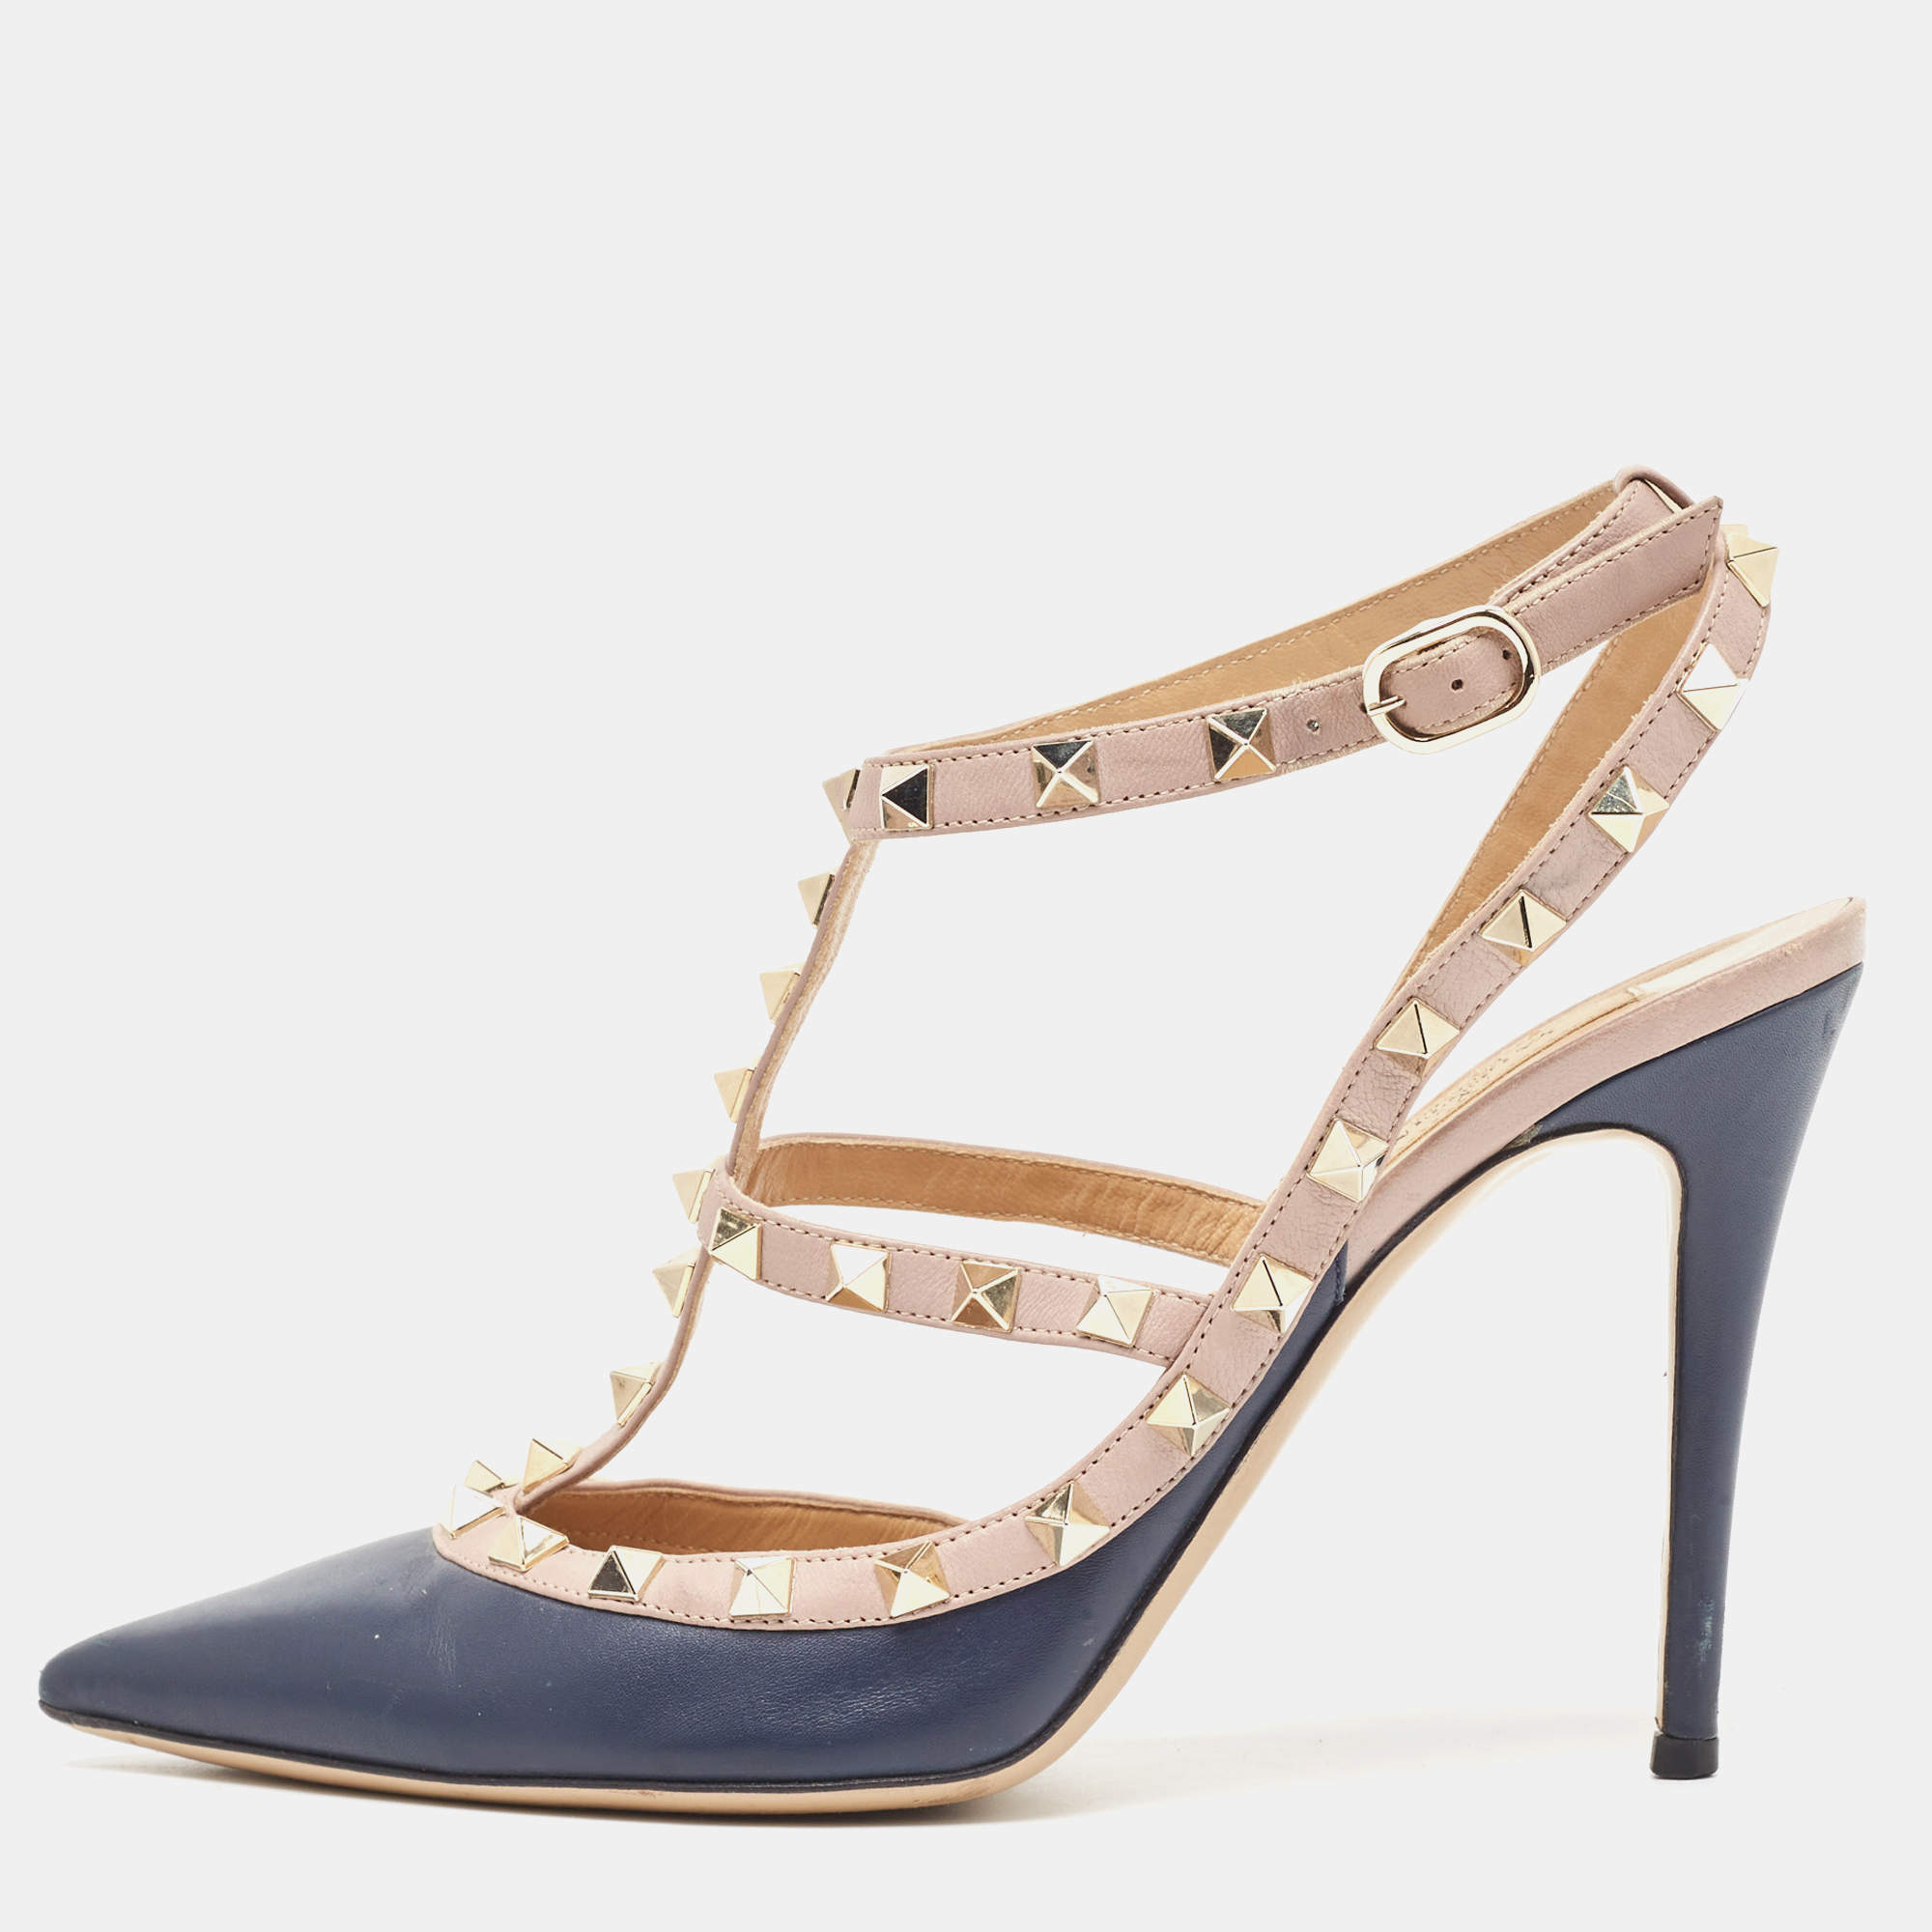 Valentino Navy Blue/Dusty Pink Leather Rockstud Ankle Strap Pumps Size 39.5